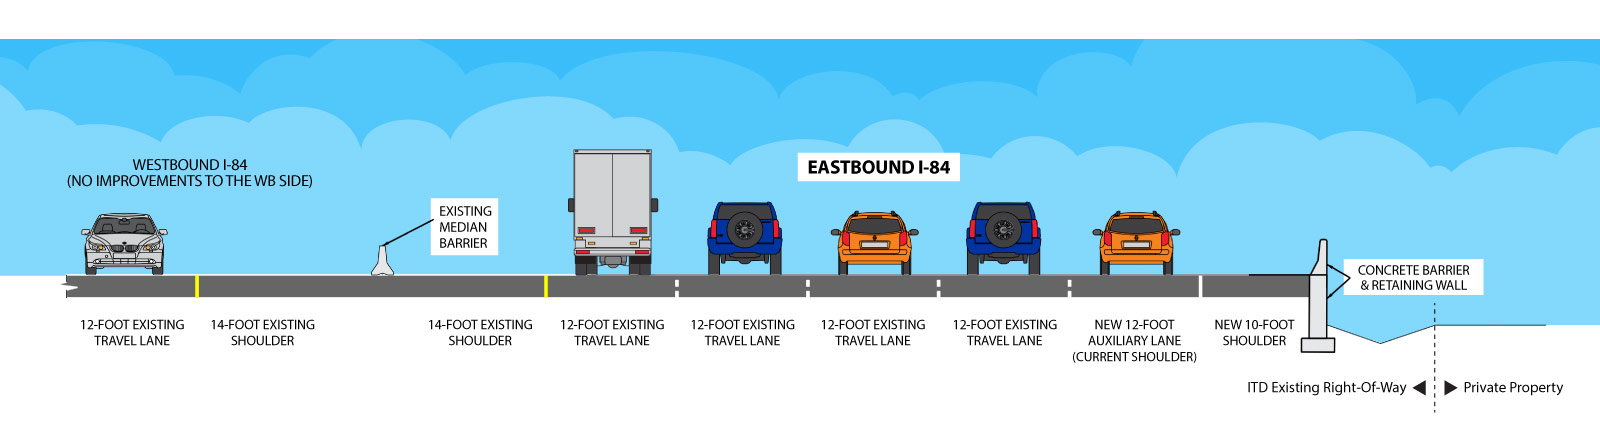 Typical section cutout graphic of the eastbound lanes of the project. Lanes from center to outside: 14-foot existing shoulder, 4 12-foot existing travel lanes, new 12-foot auxiliary lane (current shoulder), and a new 10-foot shoulder.